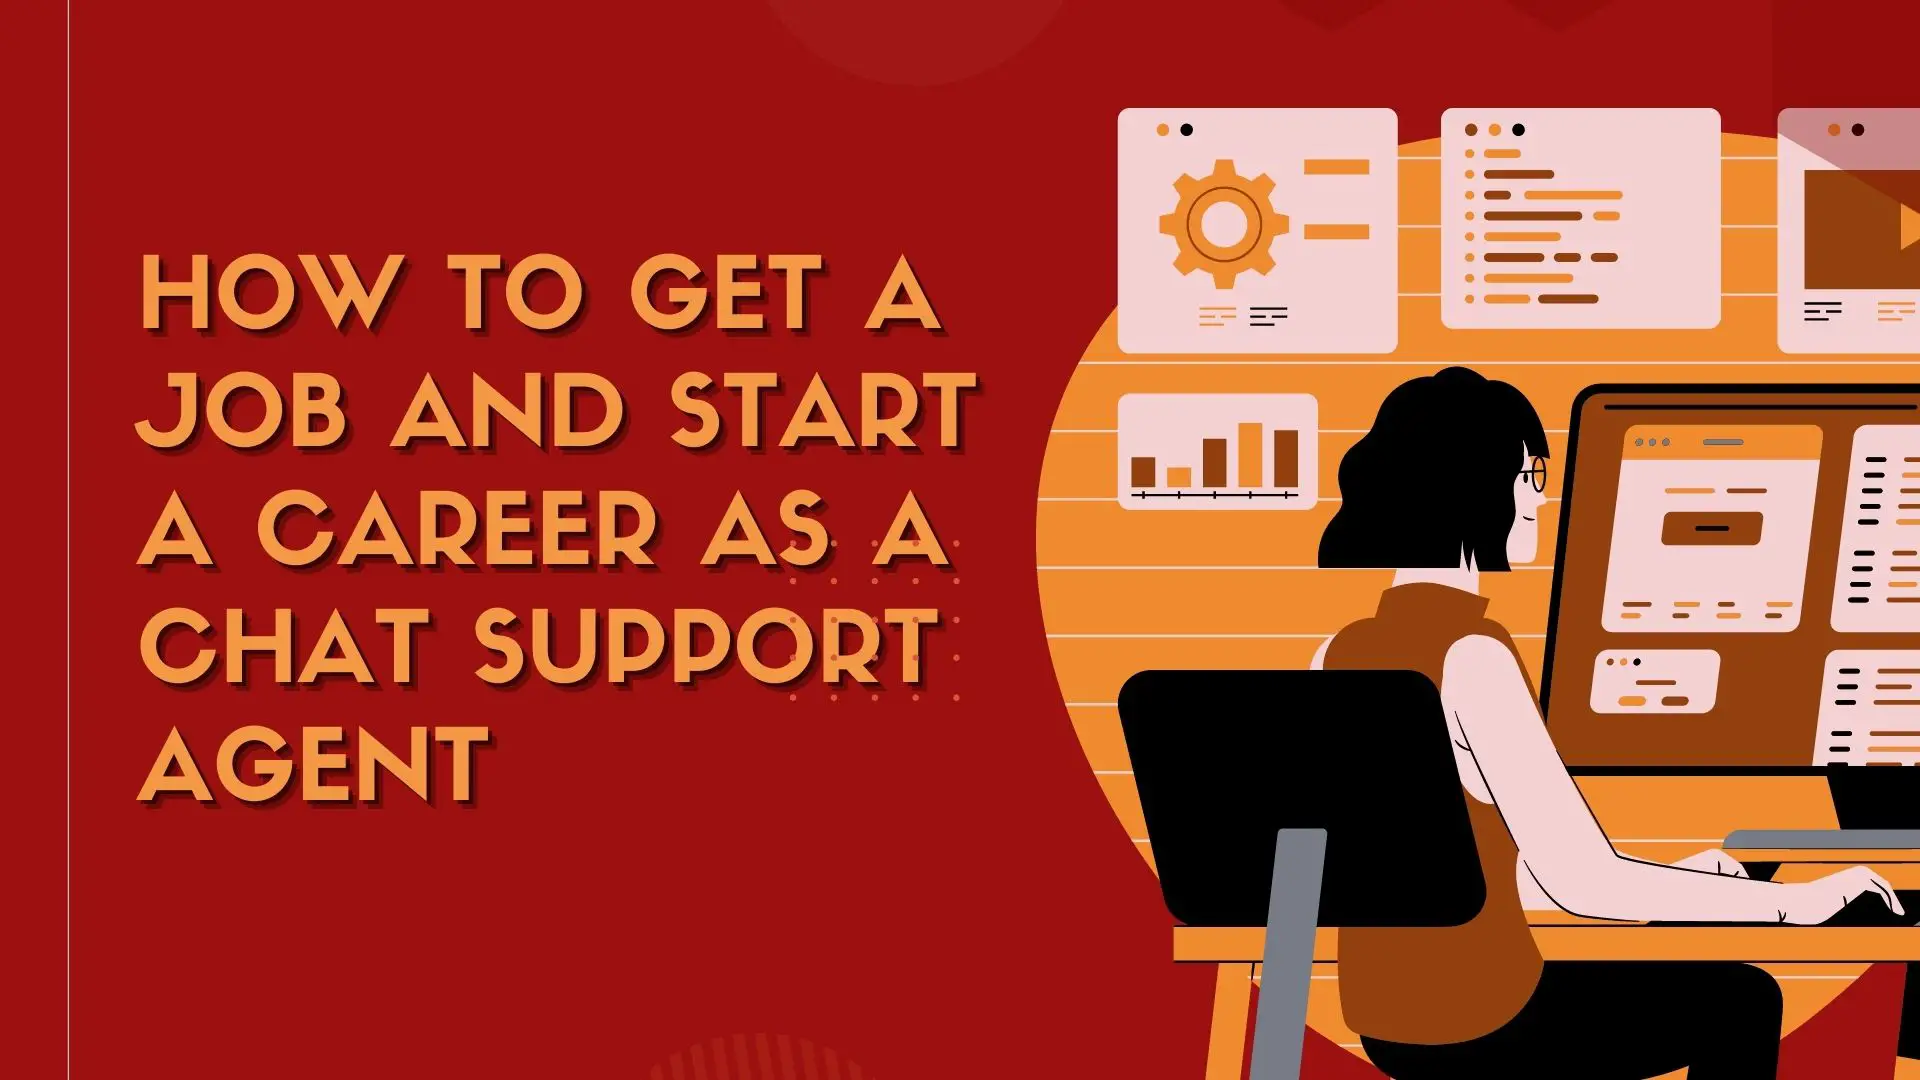 How To Get A Job And Start A Career As A Chat Support Agent